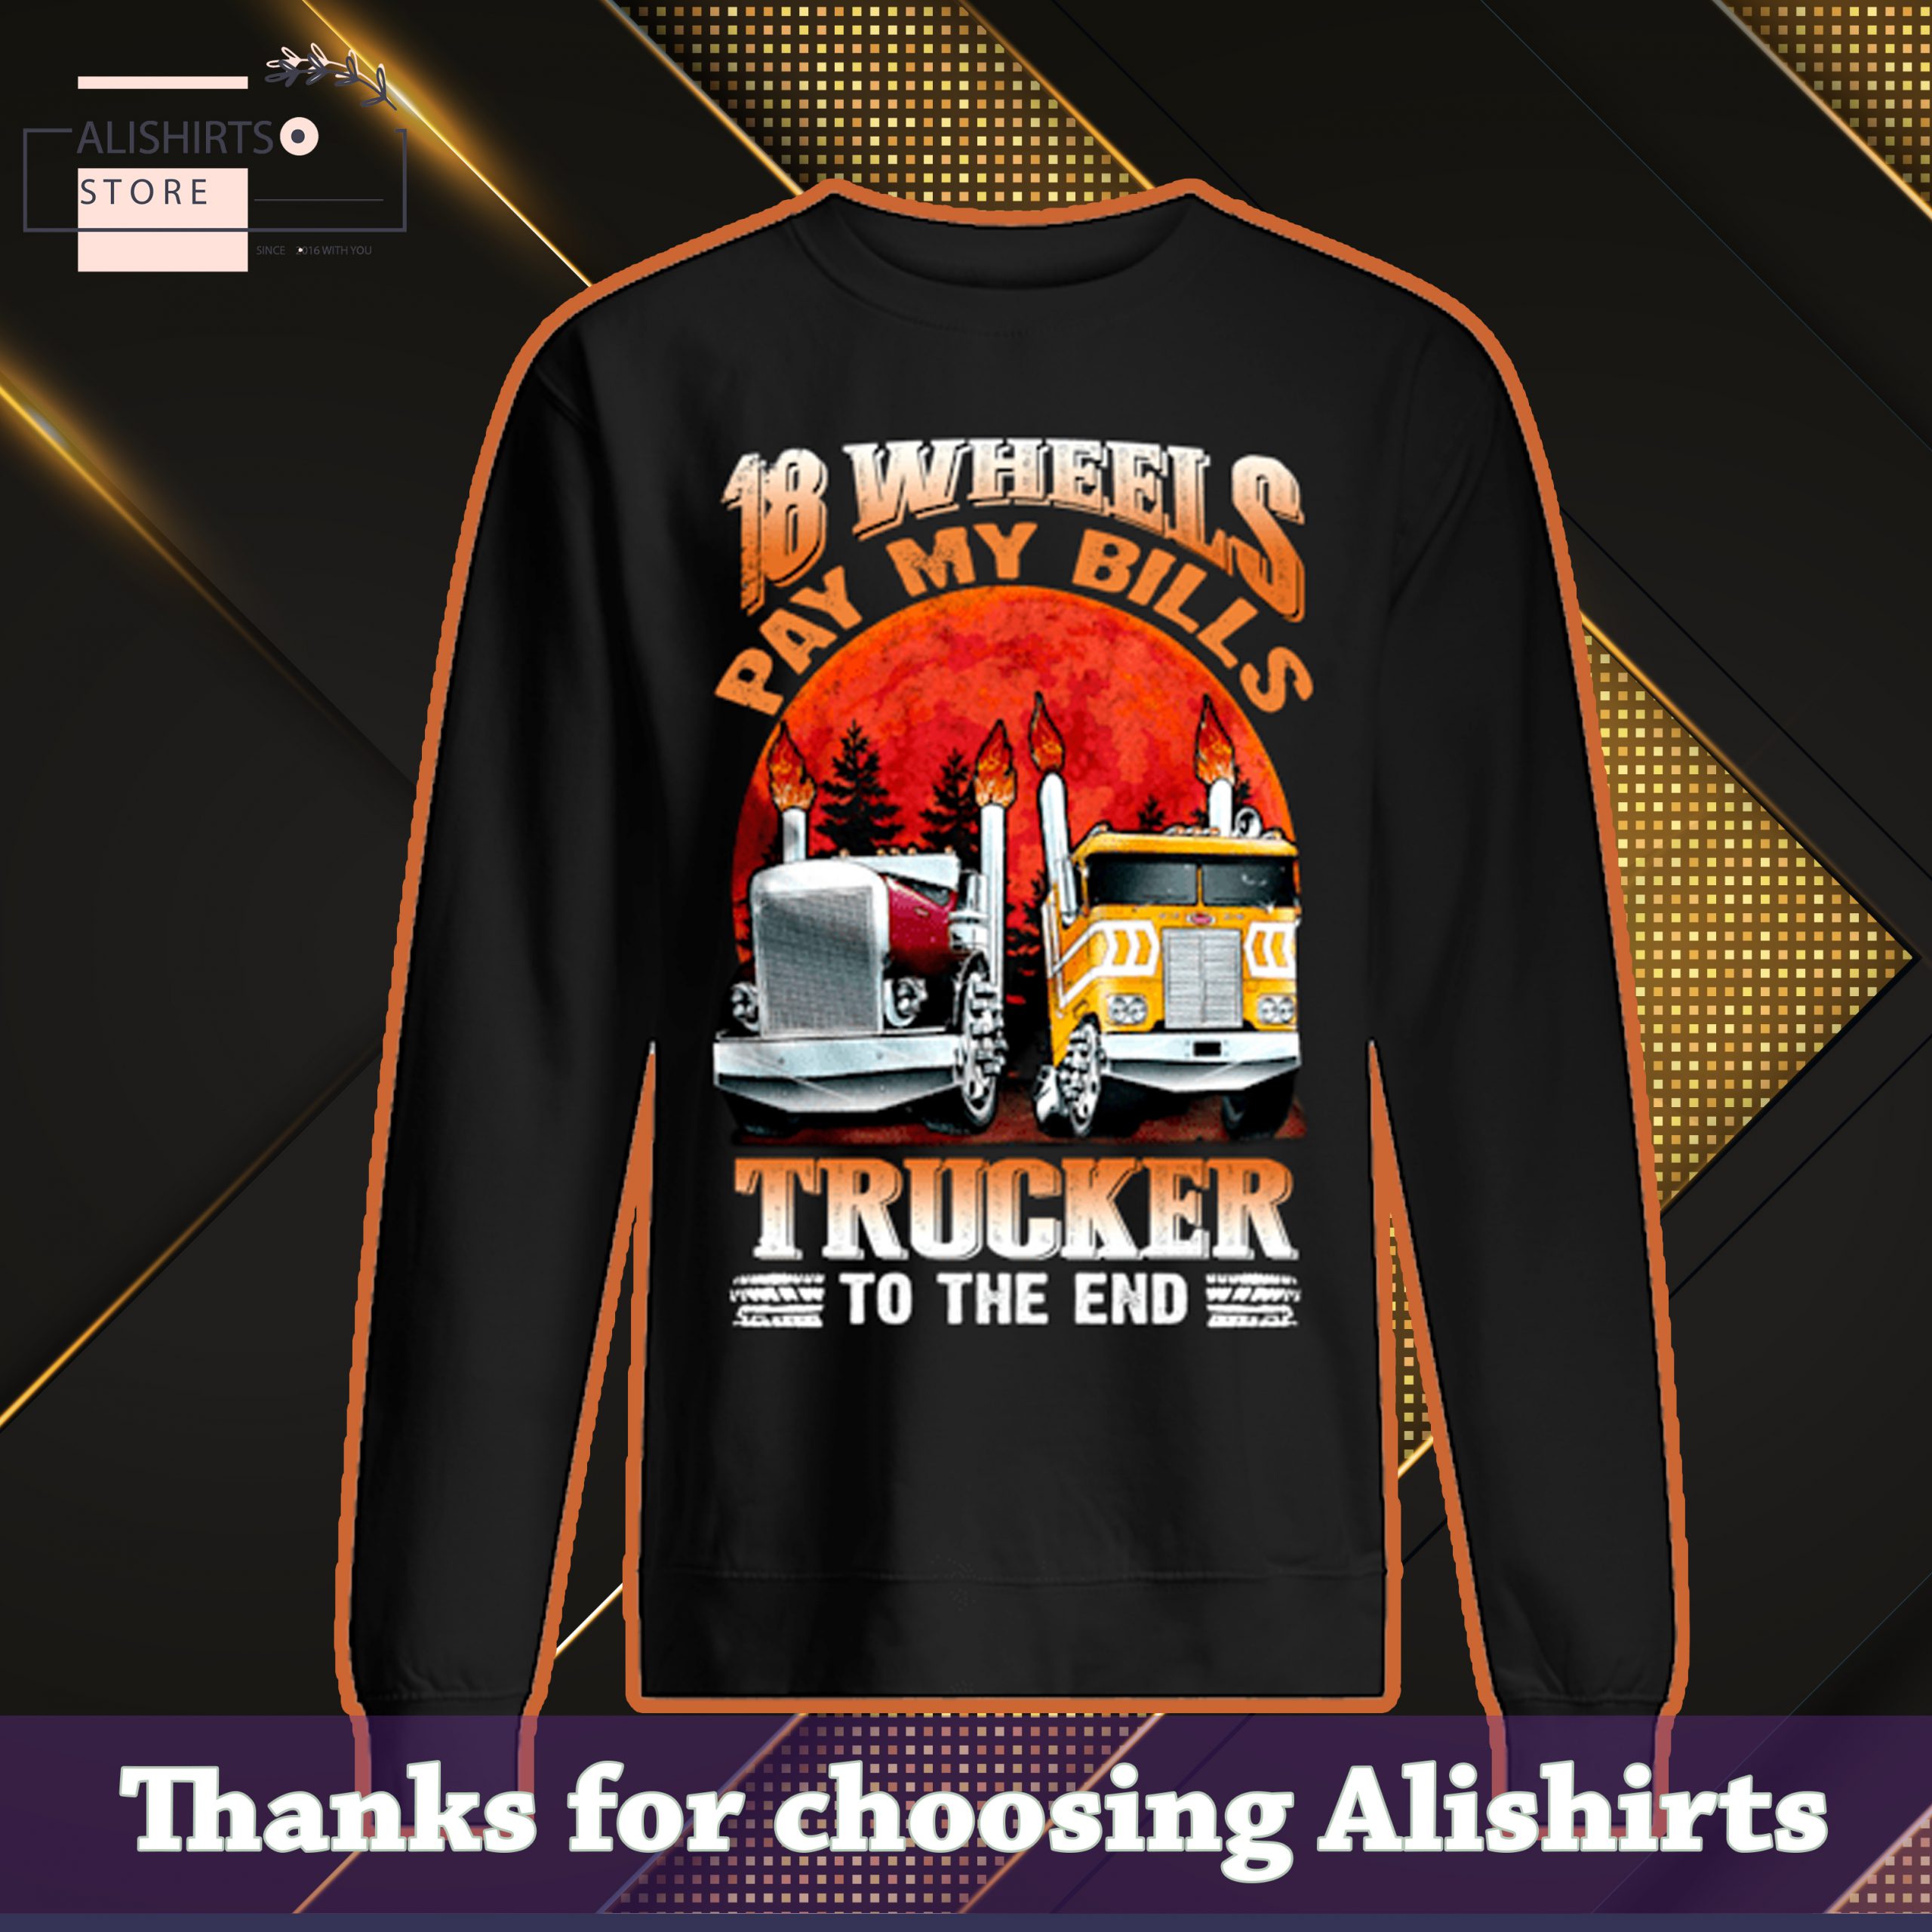 18 wheels pay for bills trucker to the end shirt